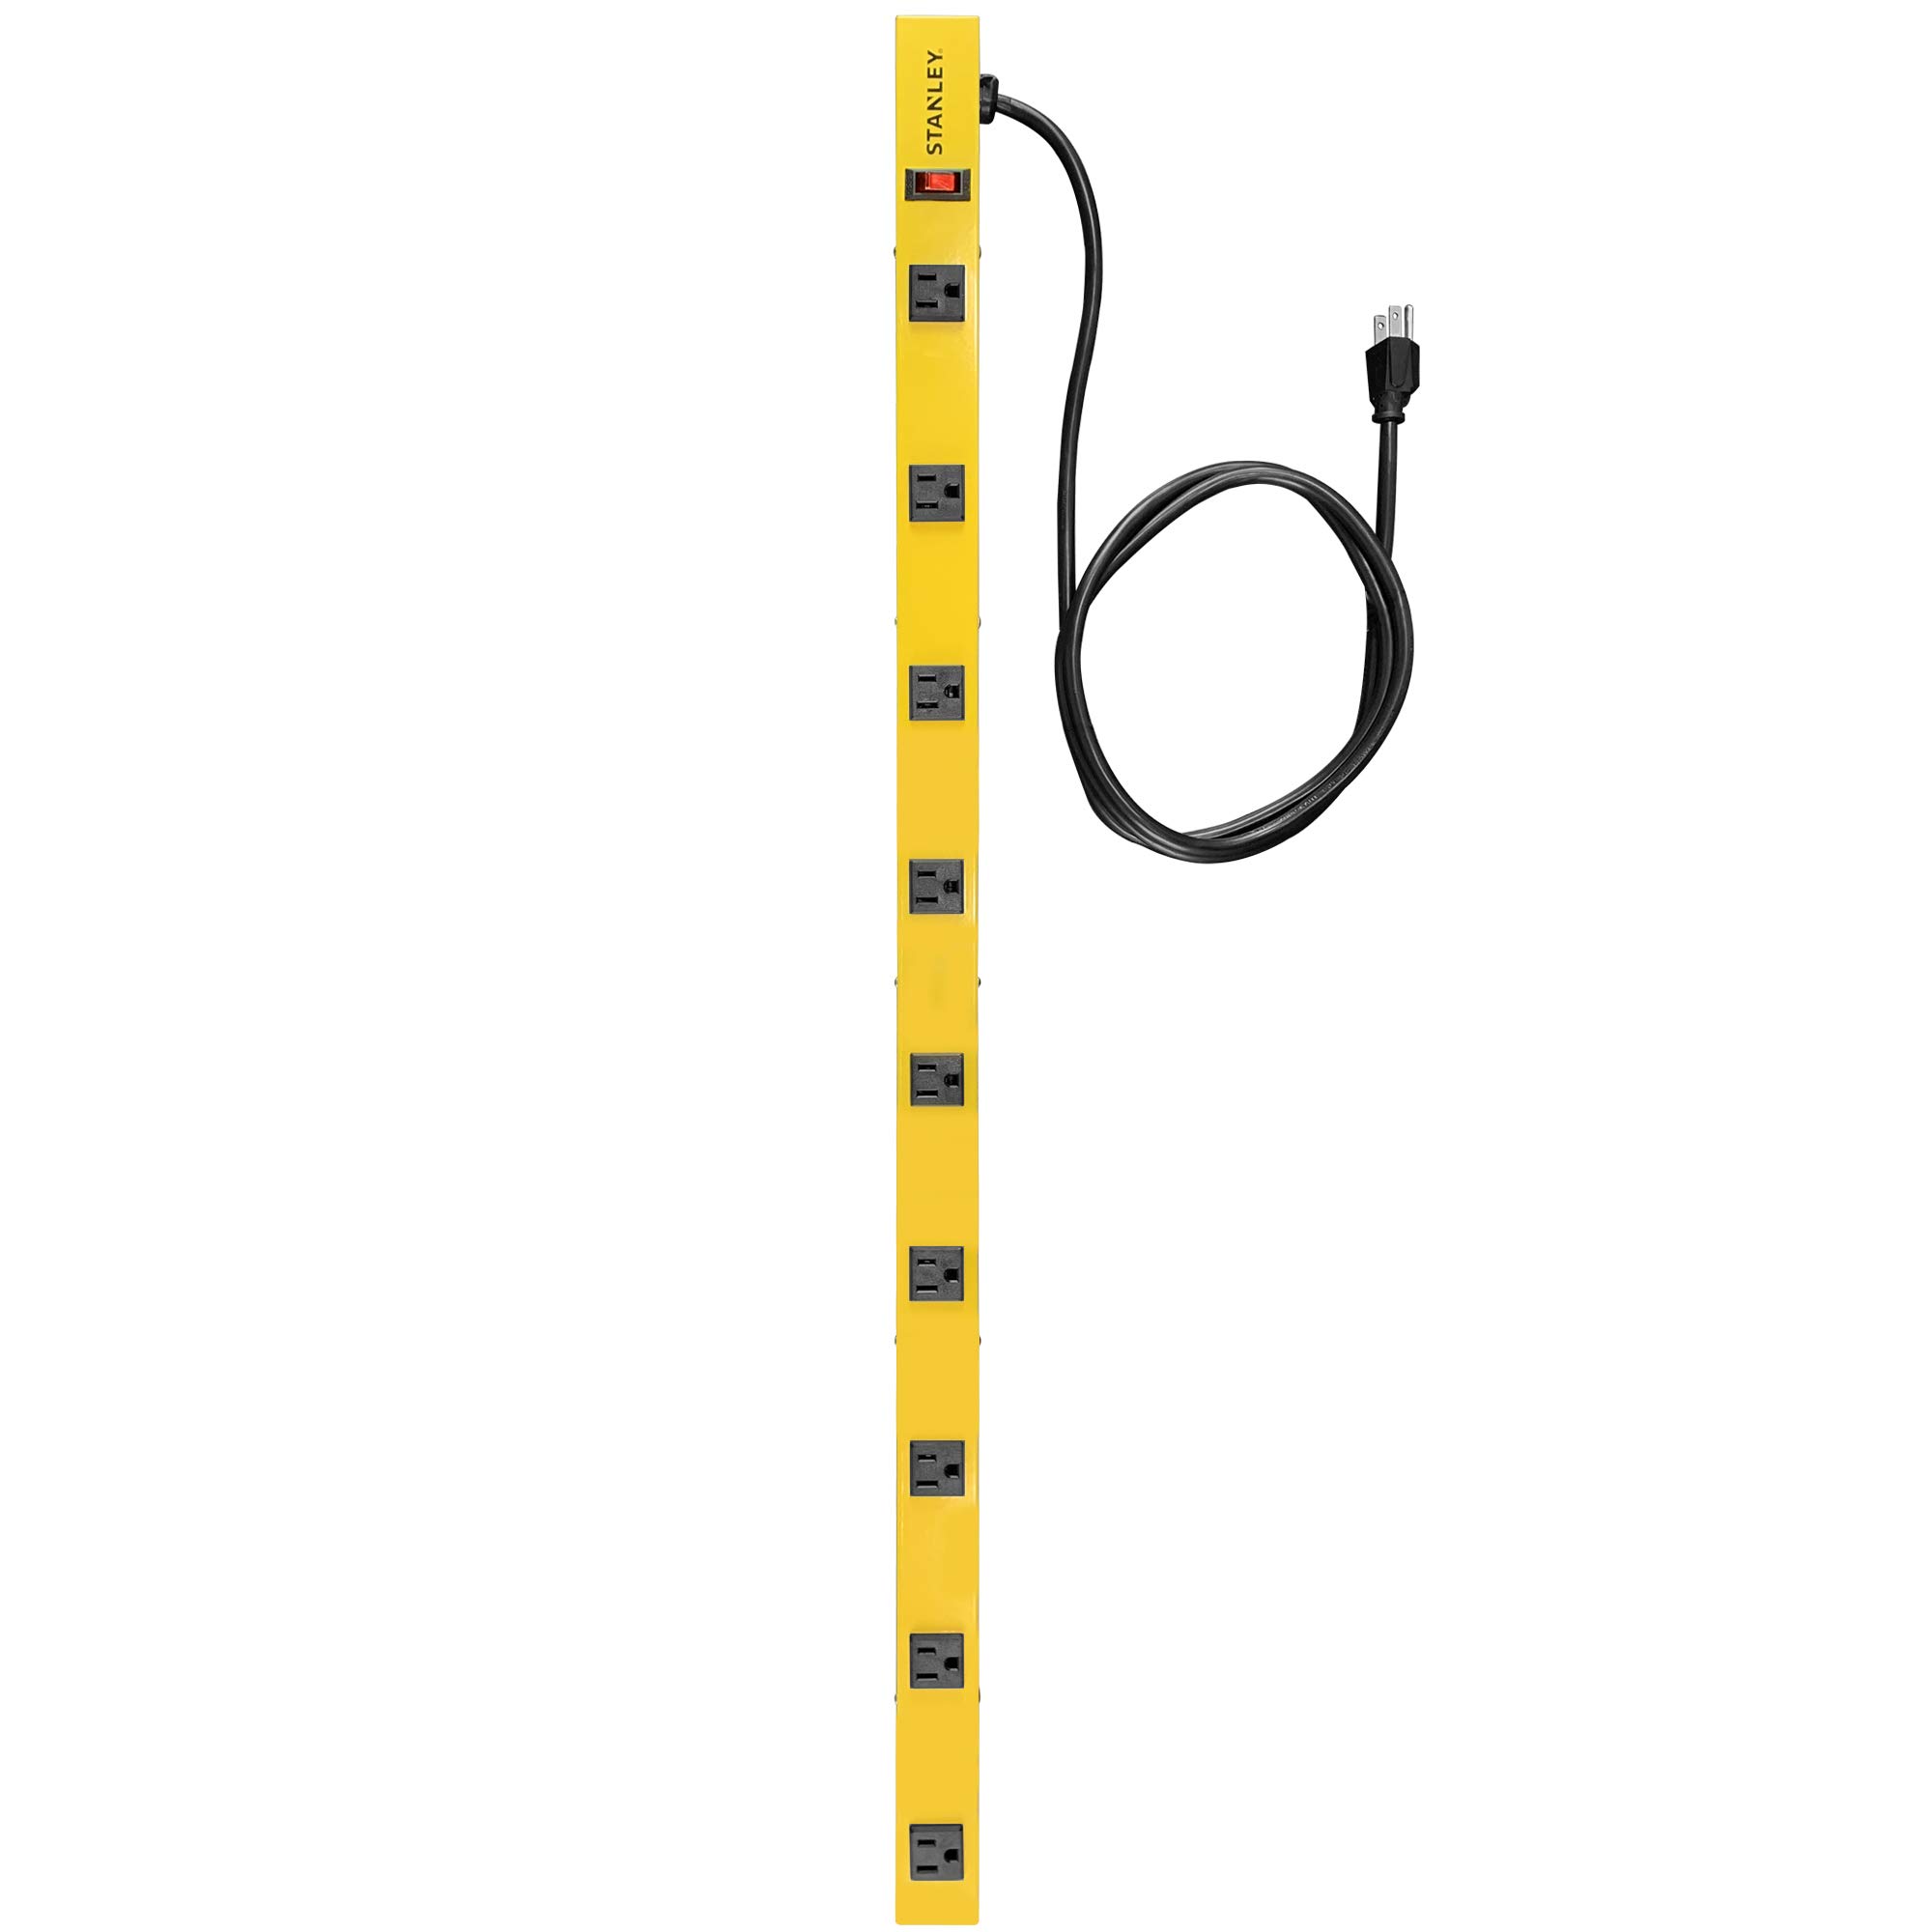 Stanley 31615 NCC31615 ShopMAX Pro 9-Outlet Surge-Protector Power Bar, 6-Foot Cord, Yellow